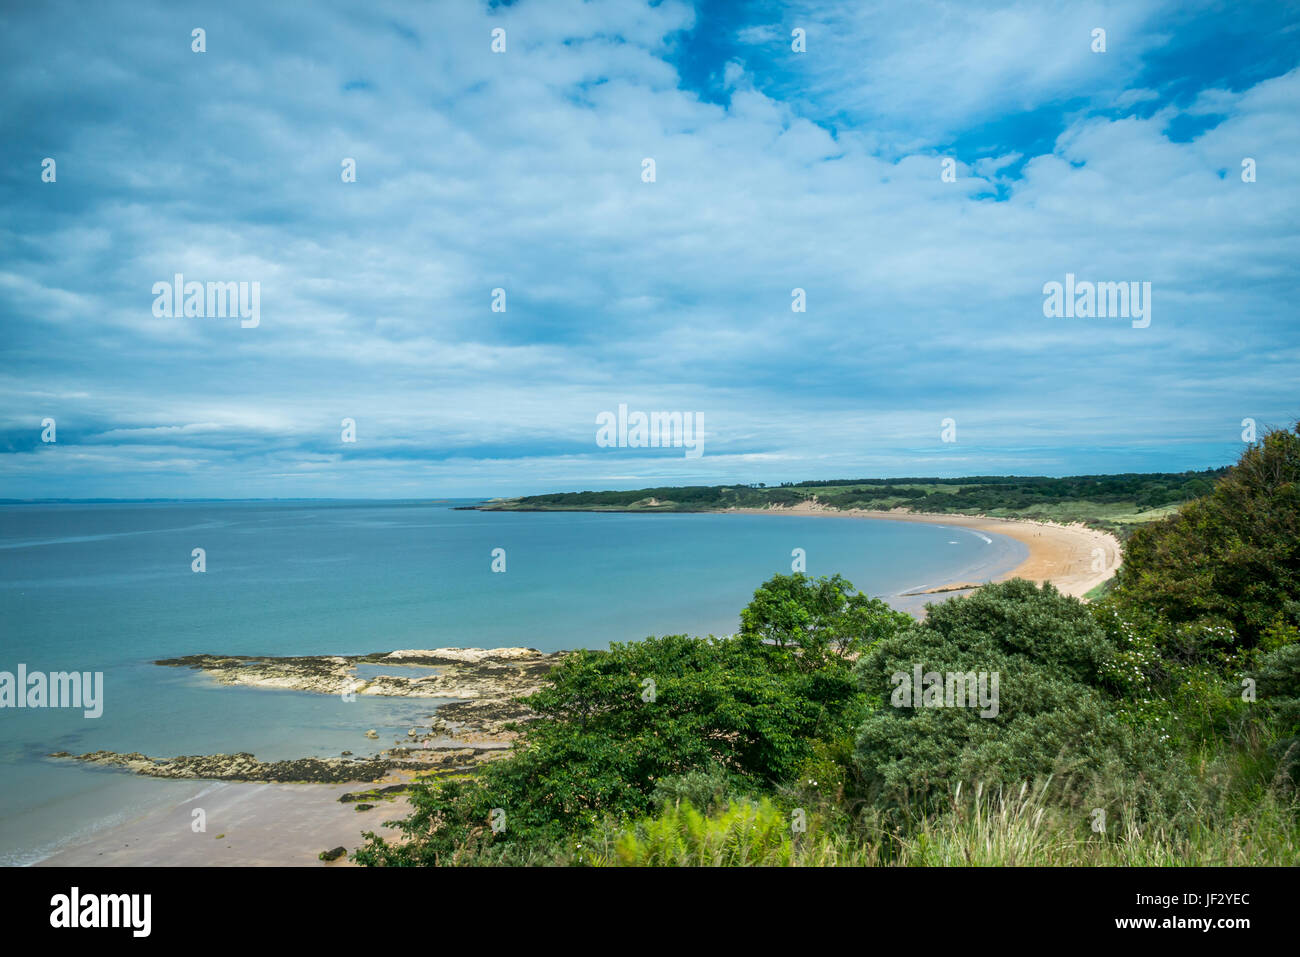 Broad view of wide sandy beach, Gullane, East Lothian, Scotland, UK,  on Summer day with blue sky and wispy clouds Stock Photo